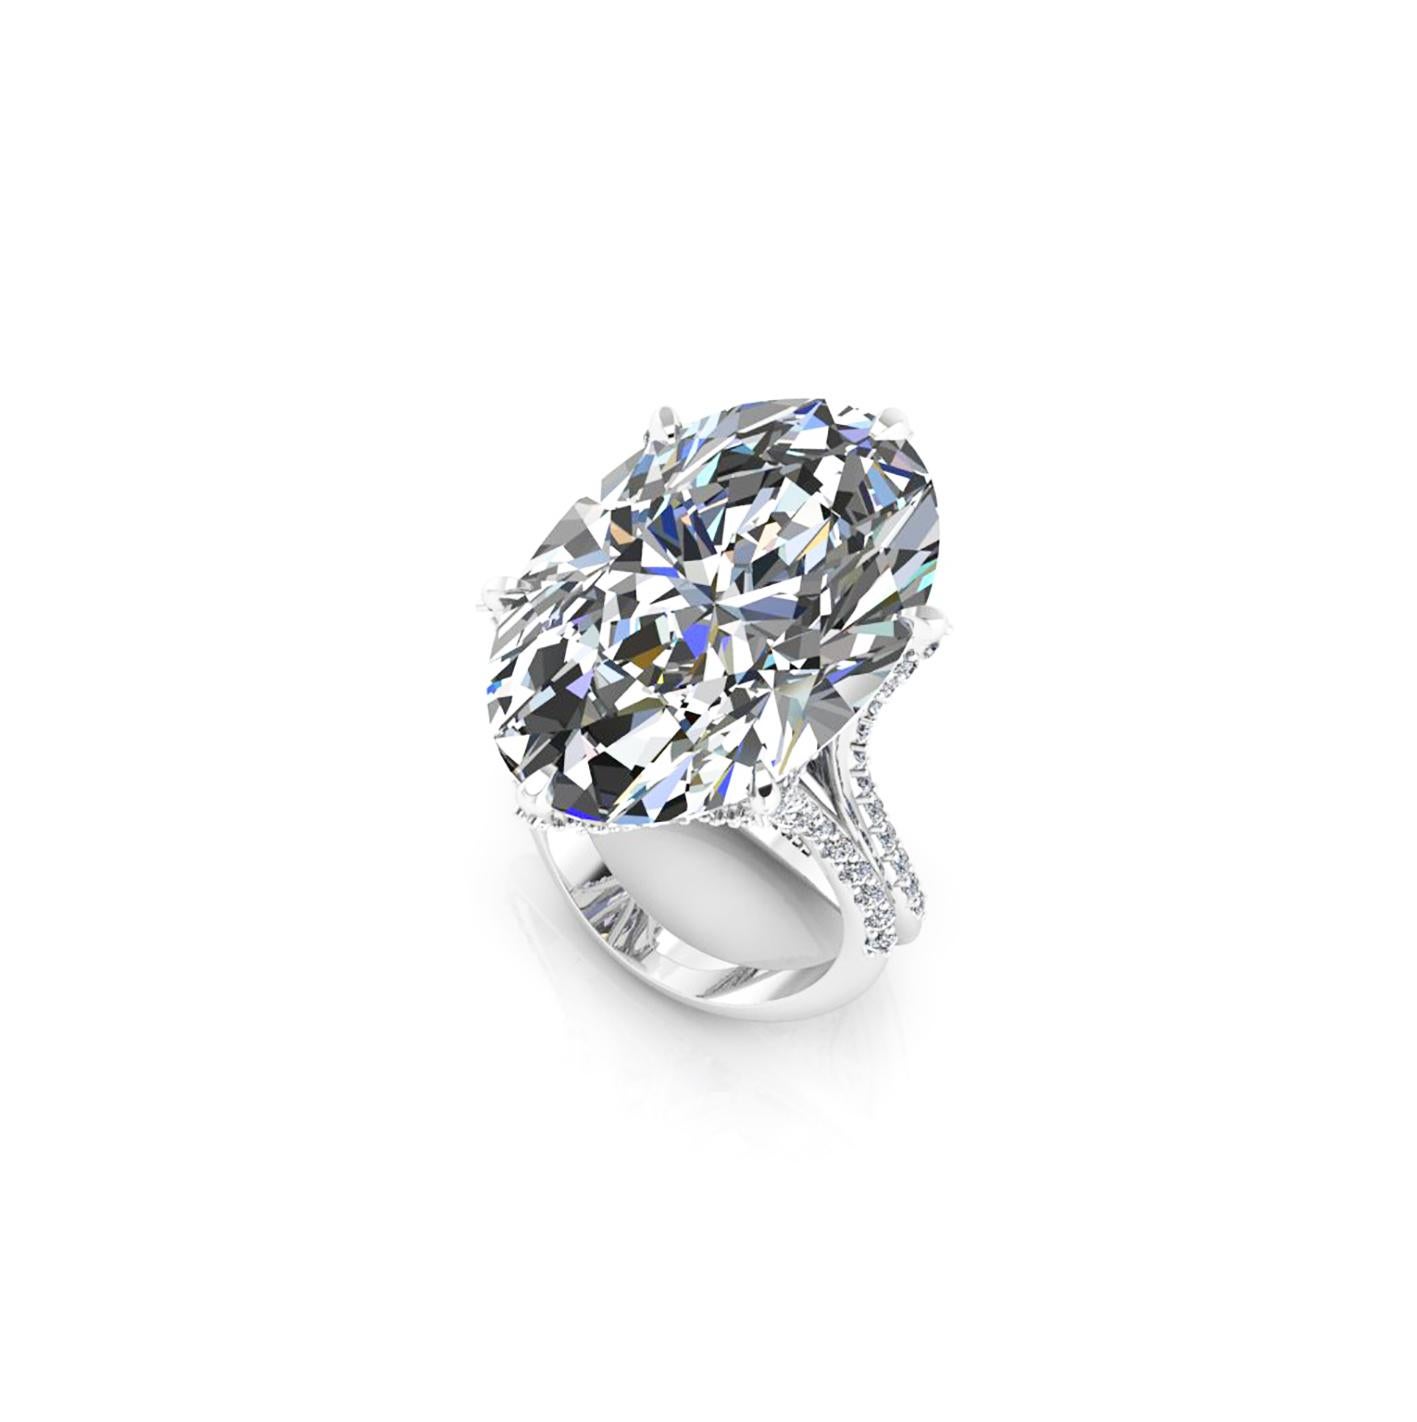 GIA Certified 16.37 carat Oval Diamond, set in a uniquely designed Platinum 950 ring with white diamonds pave' all over the surface of the ring creating an effect of morning dew, for an approximate carat weight of 0.78 carat, conceived with the best